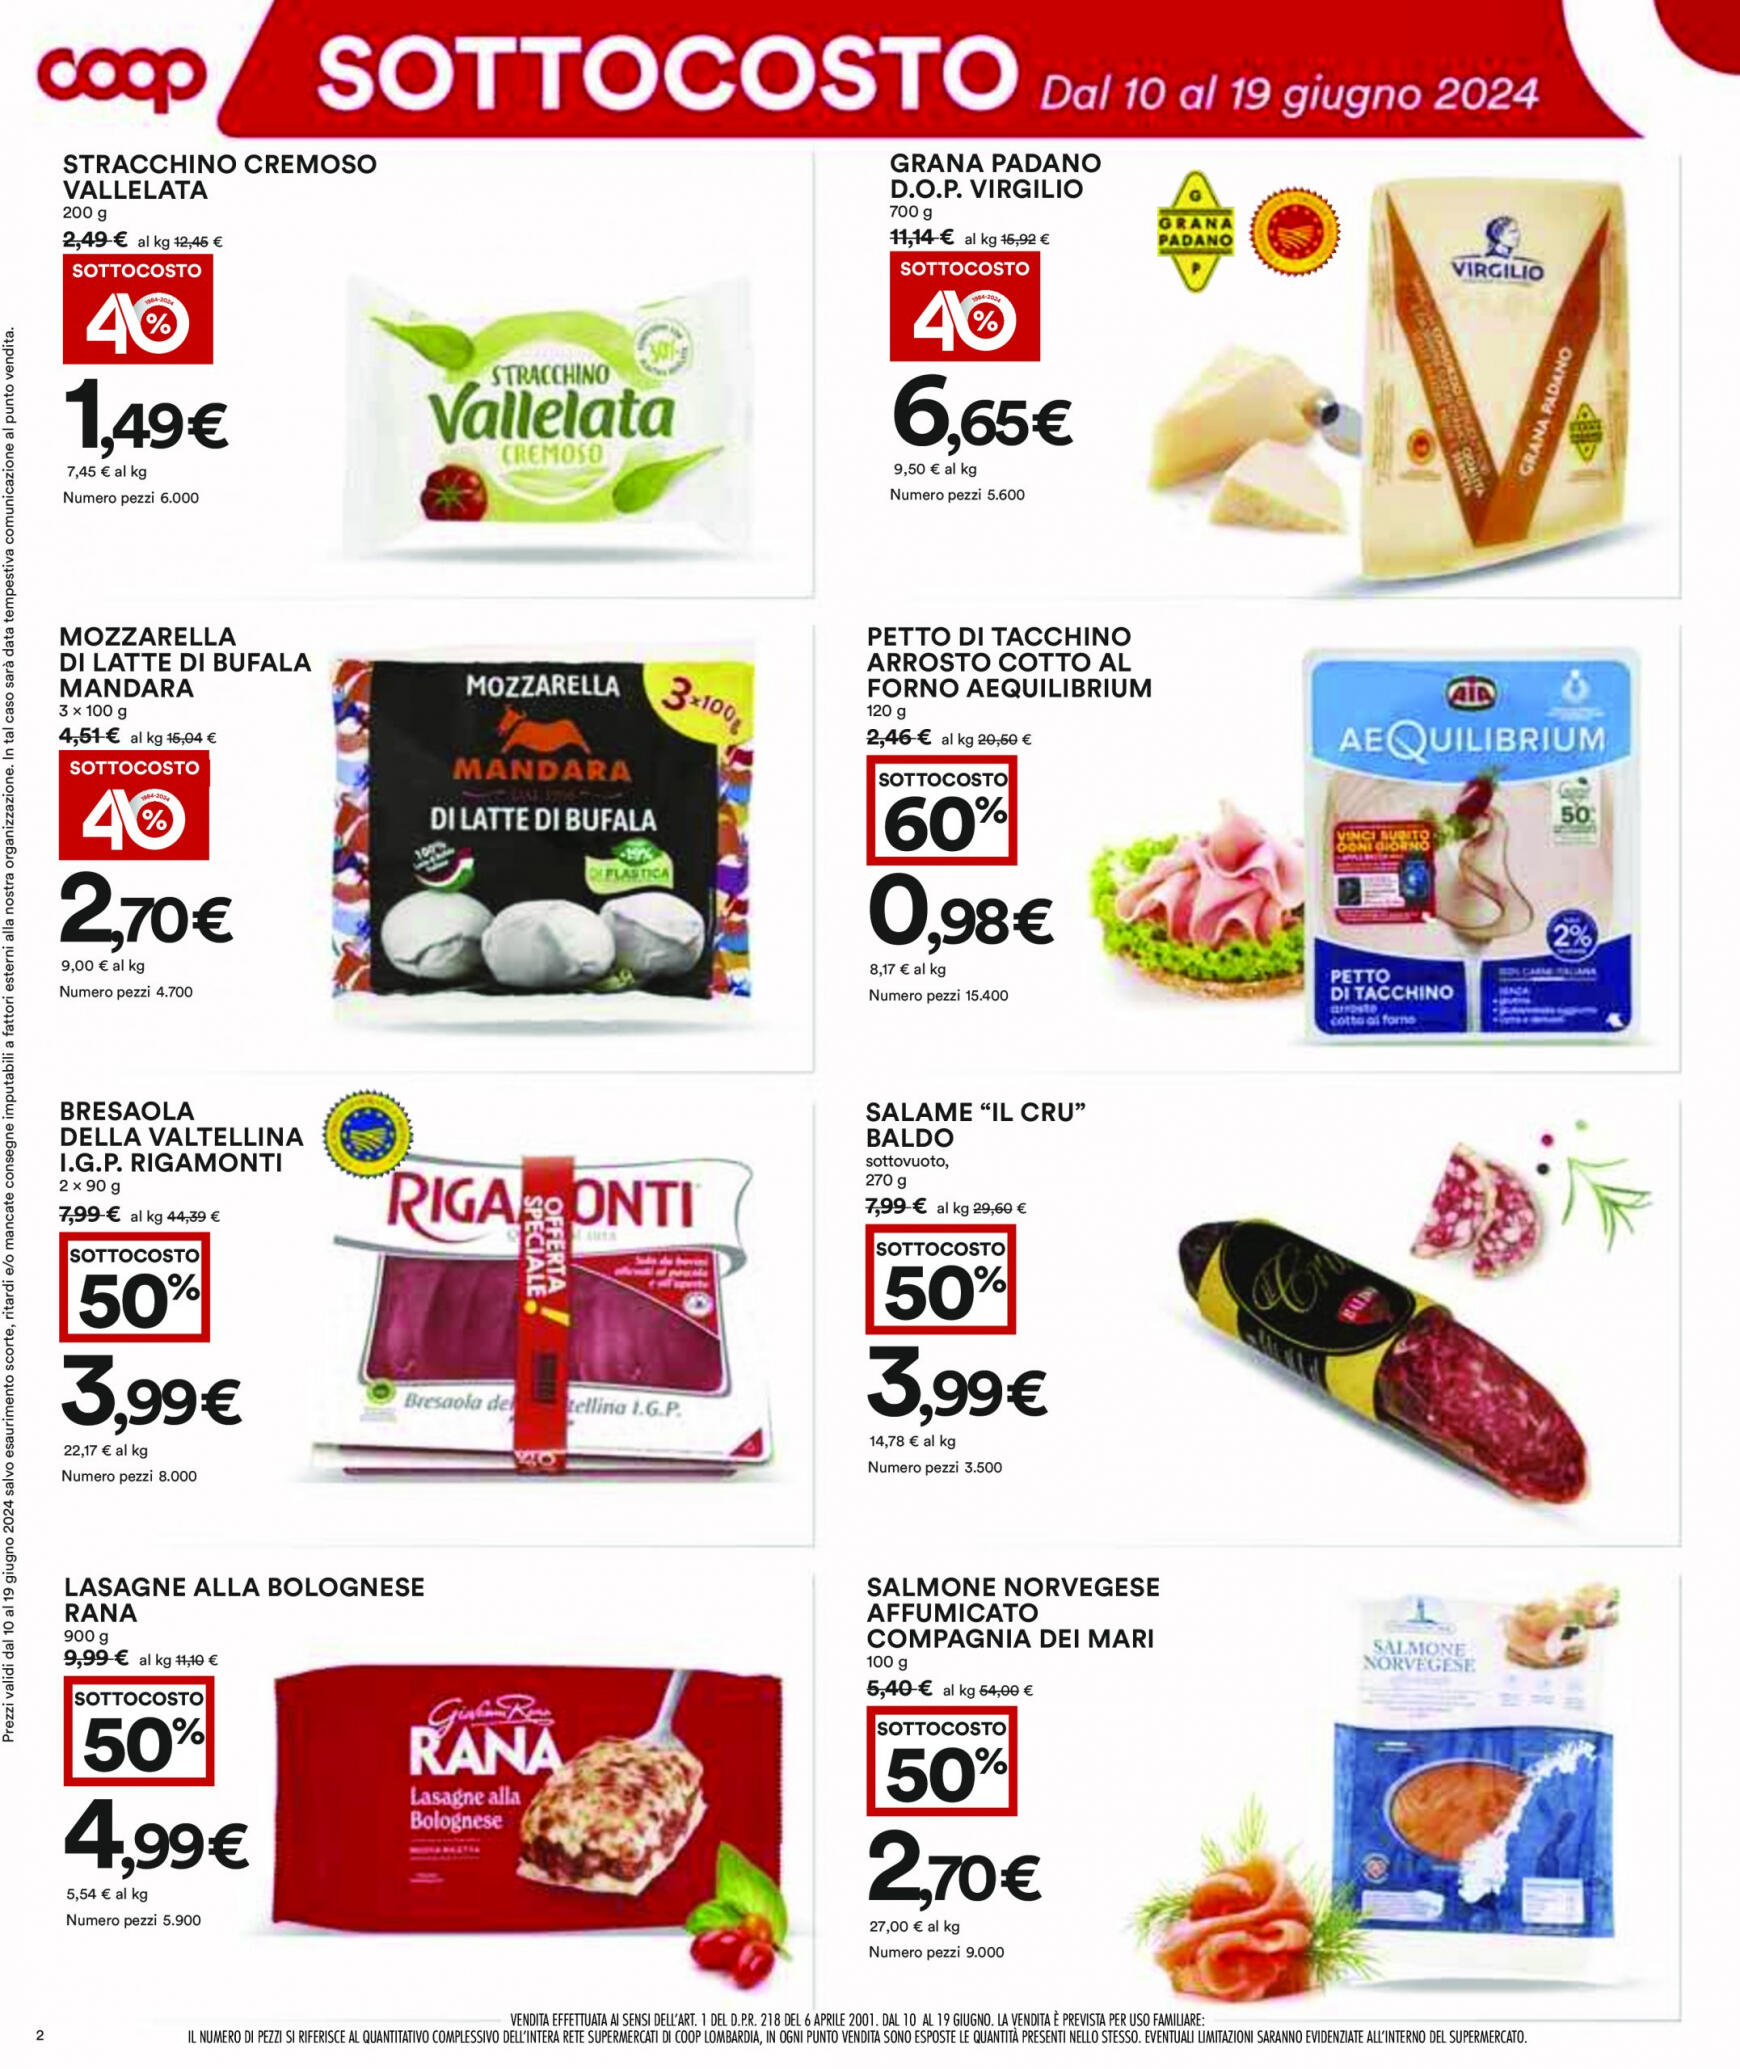 coop - Nuovo volantino Coop 10.06. - 19.06. - page: 2